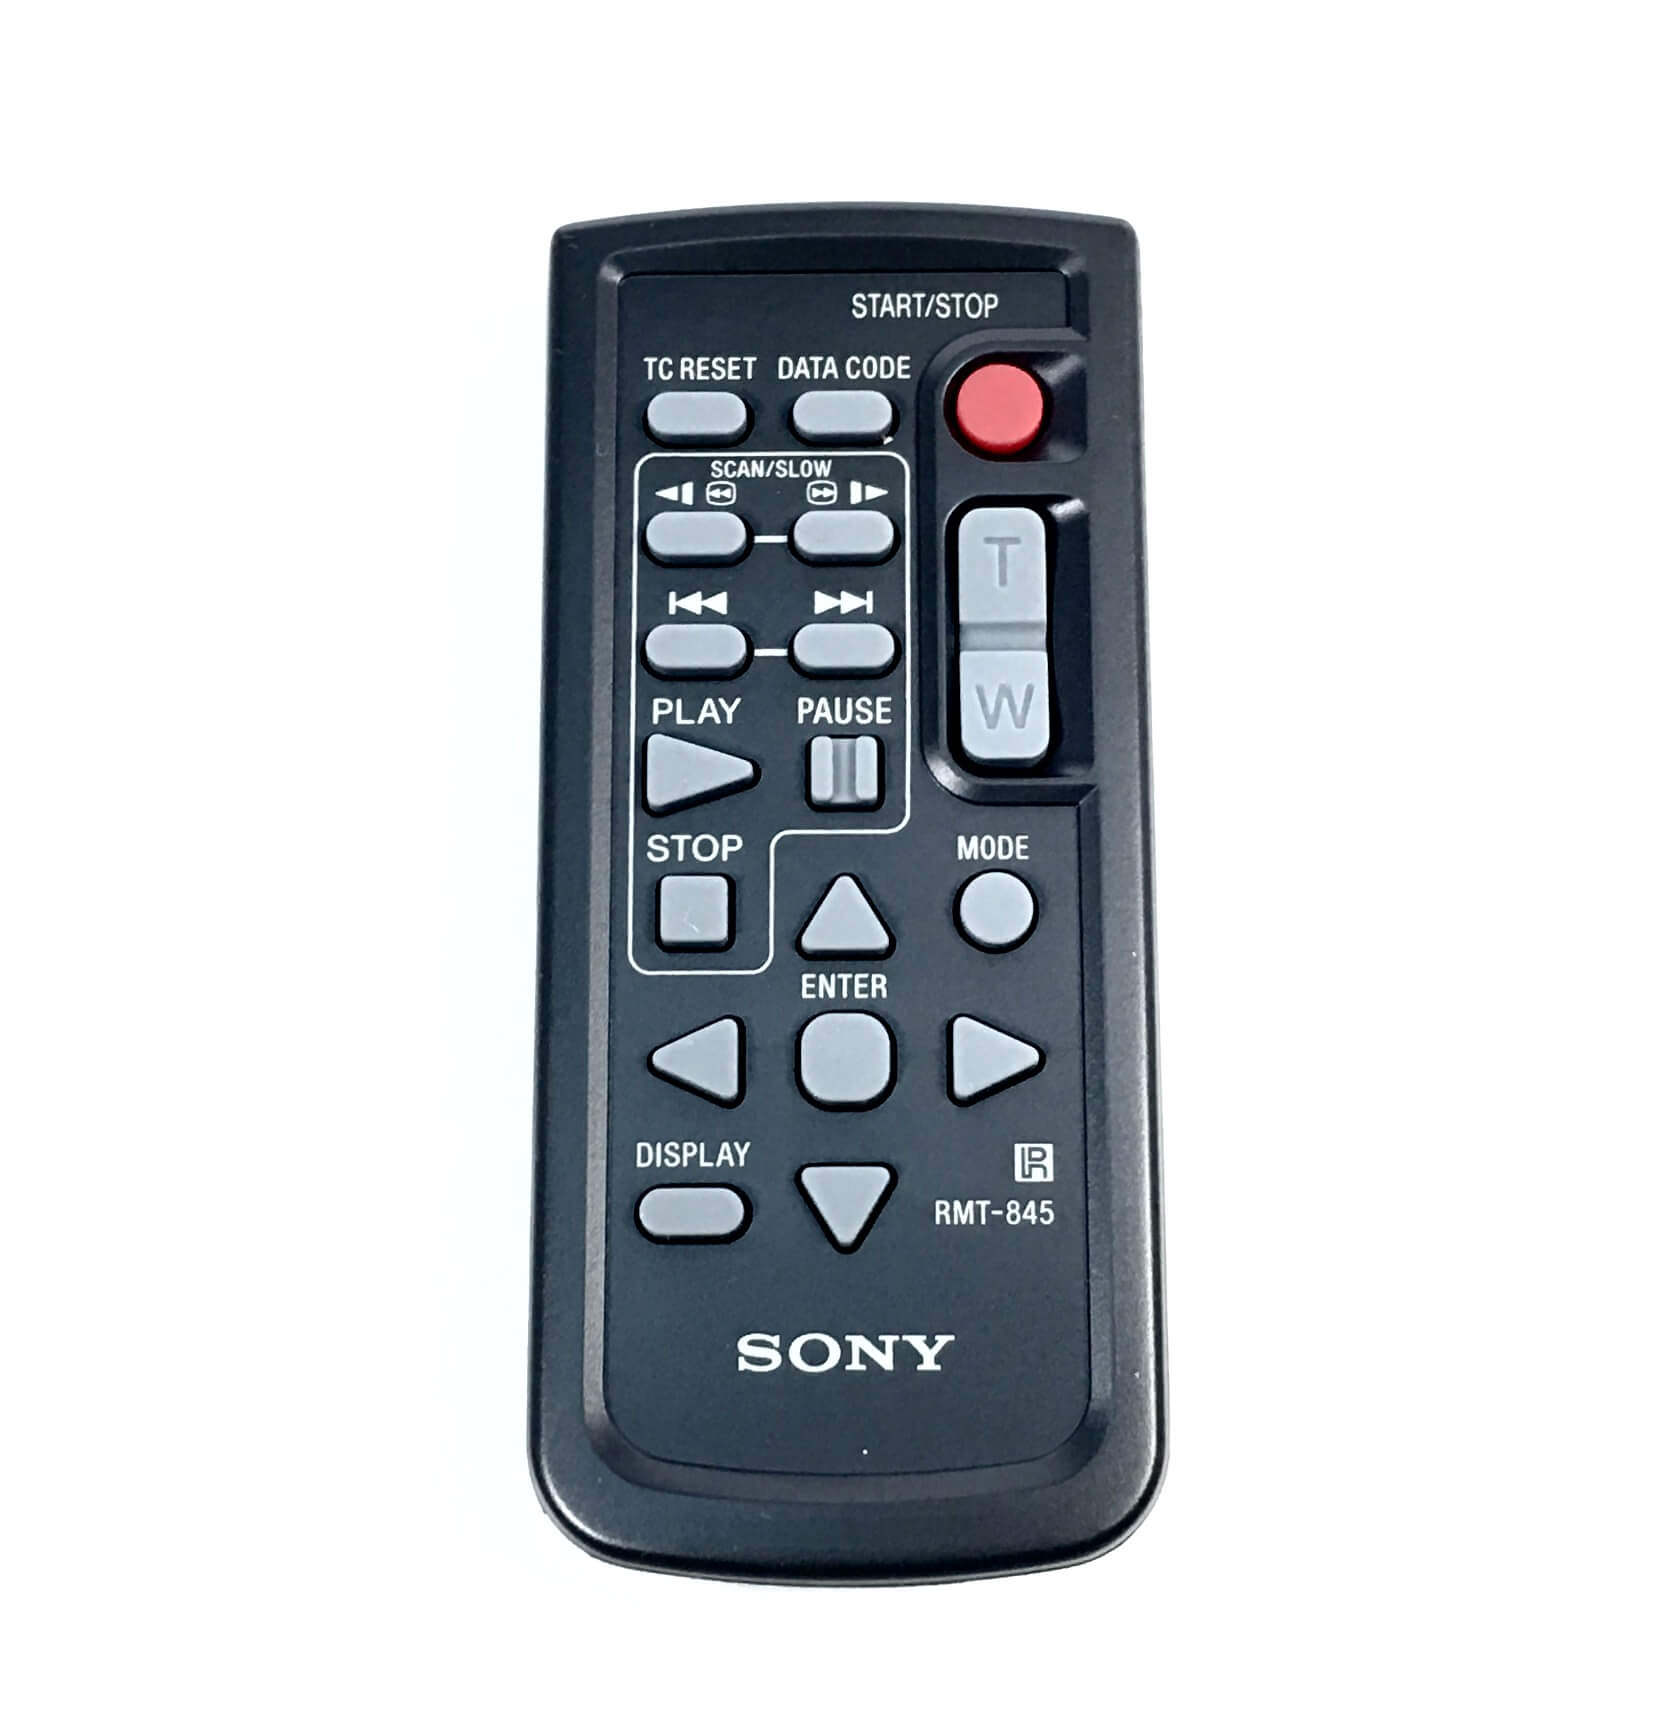 Original wireless remote control that came with the Sony HXR-NX100 camcorder. It is a genuine Sony part, sourced directly from Sony USA. Brand new factory fresh. Free Shipping.